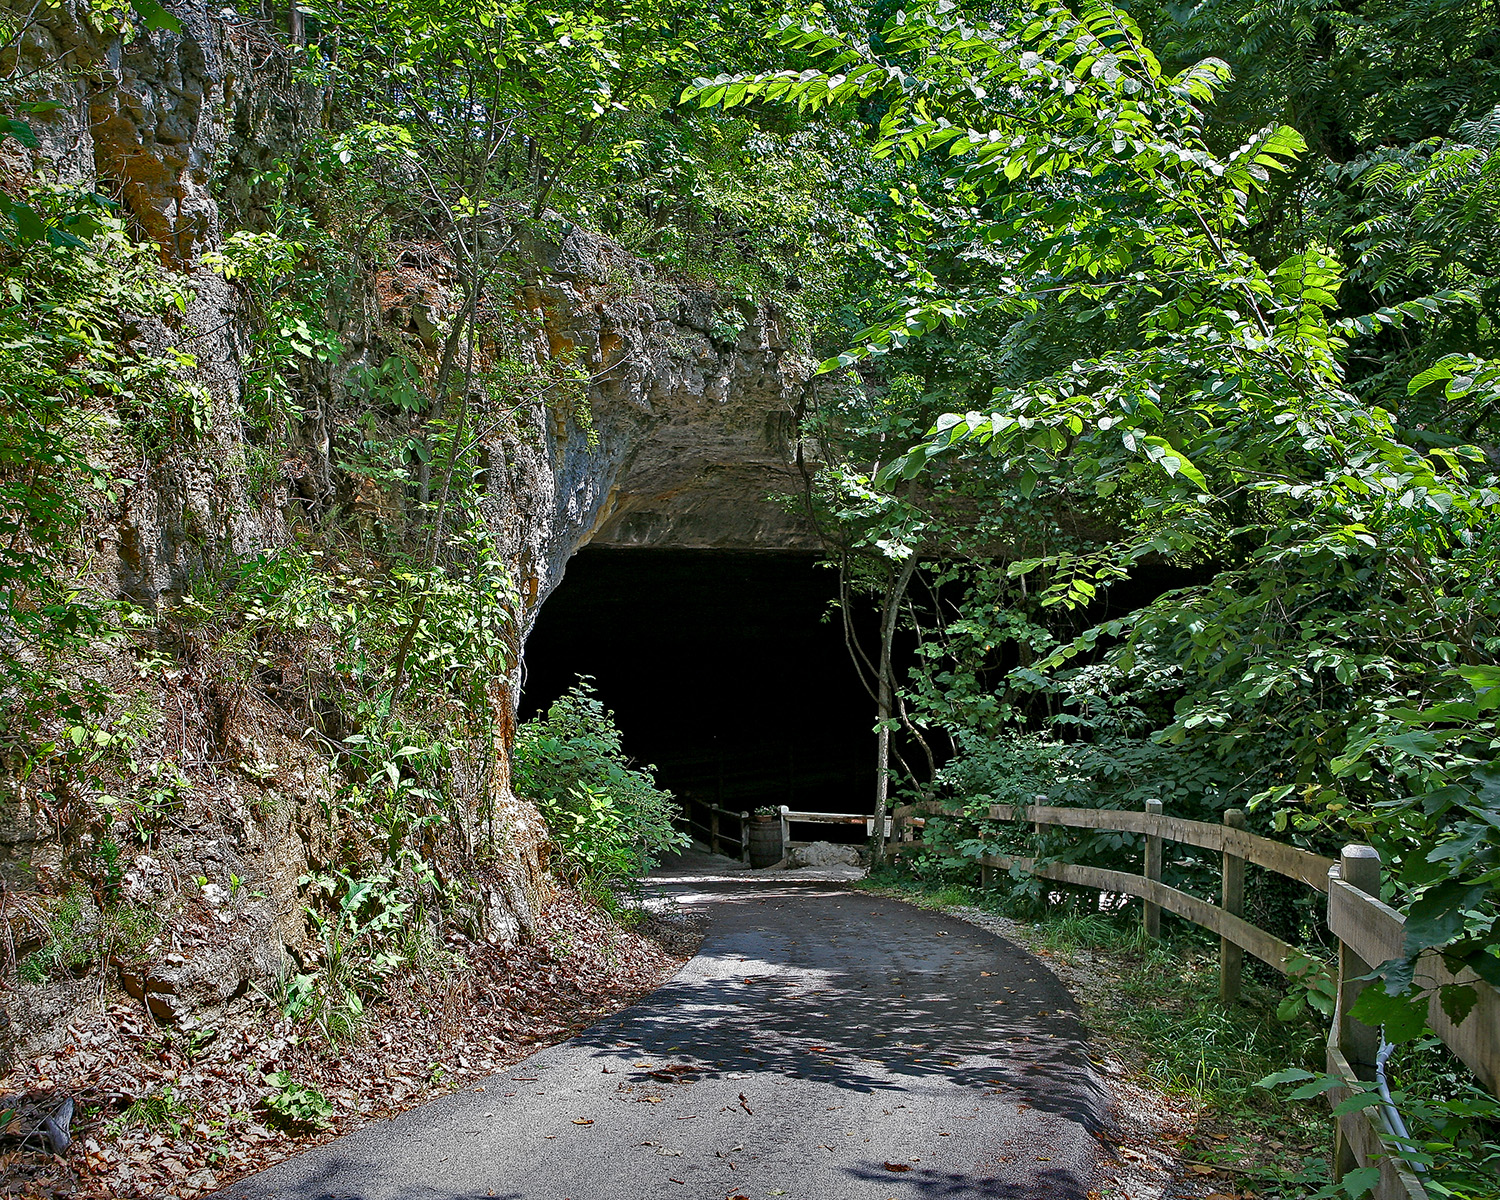 entrance to the cave